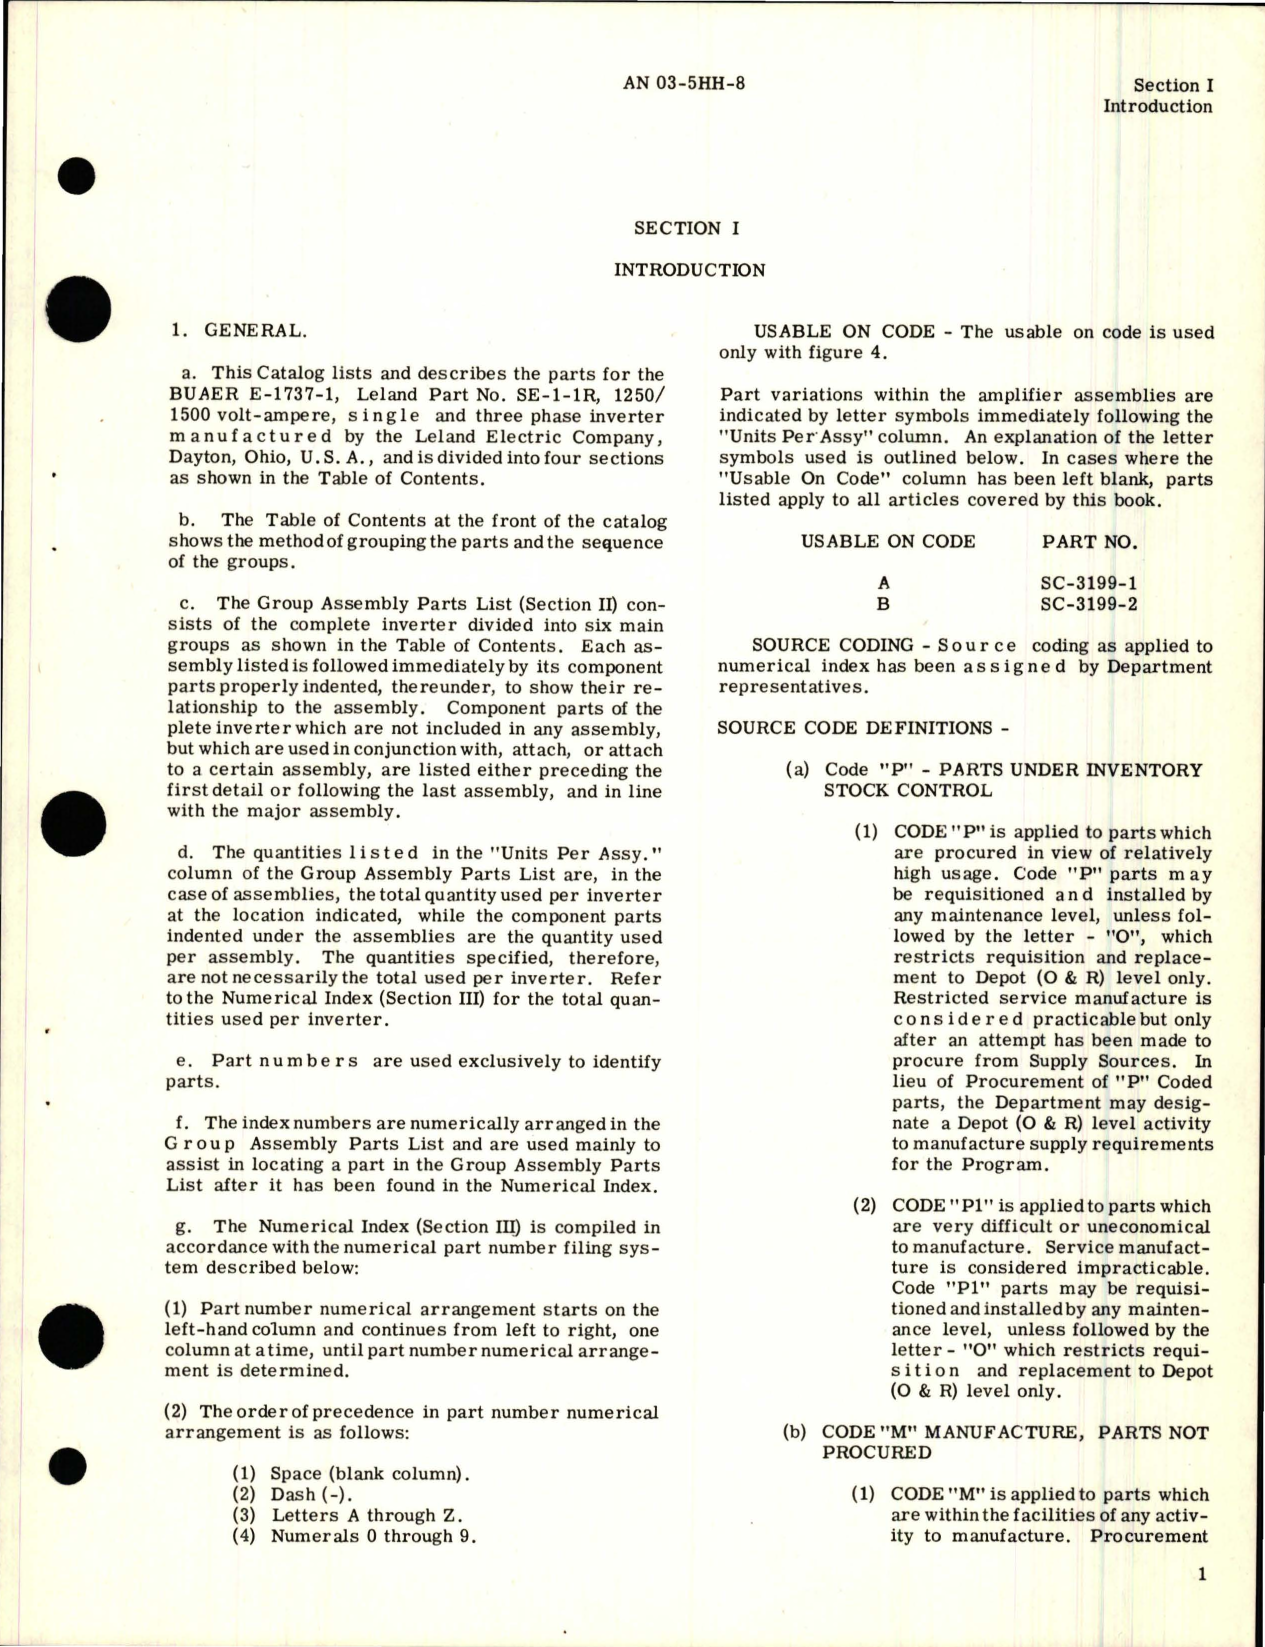 Sample page 5 from AirCorps Library document: Parts Catalog for Inverter - Part SE-1-1R